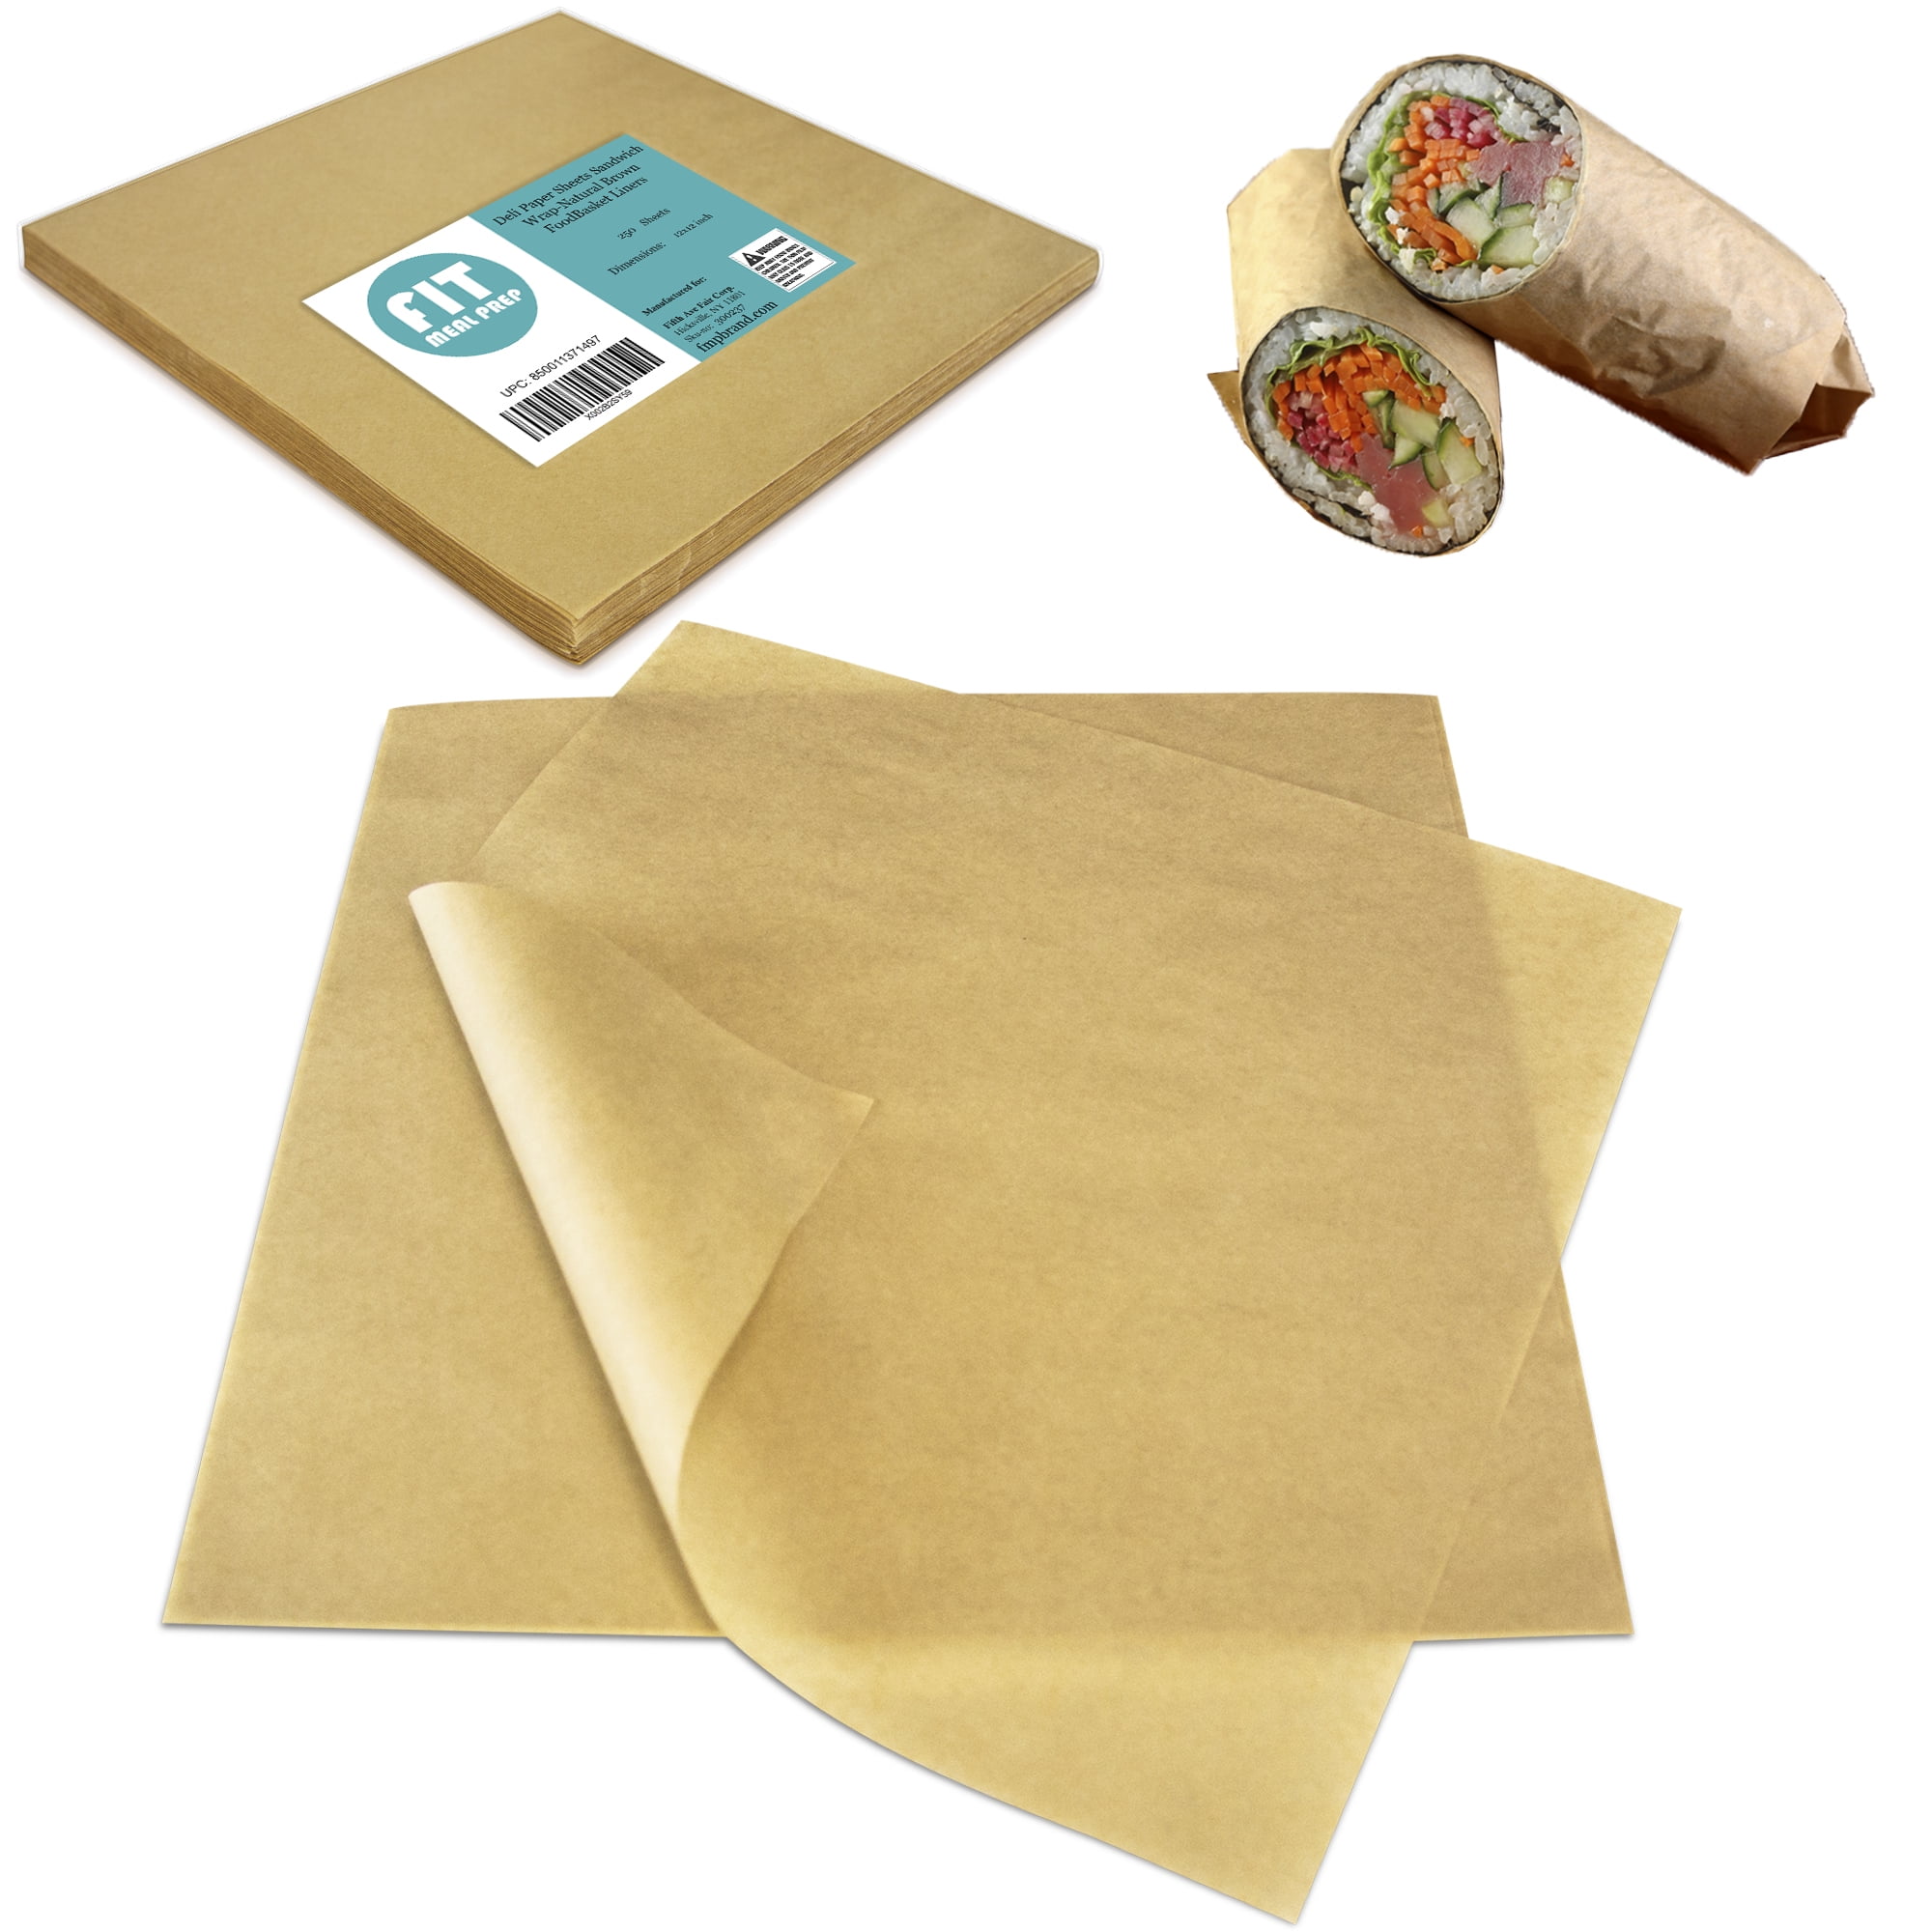  120 Sheets Wax Paper Dry Waxed Deli Paper Sheets 12x12 inch  Sandwich Wrap Paper Parchment Paper Blue Paper Liners Food Basket Liner for  Home Kitchen Bar Restaurant Holiday Party Supplies: Home